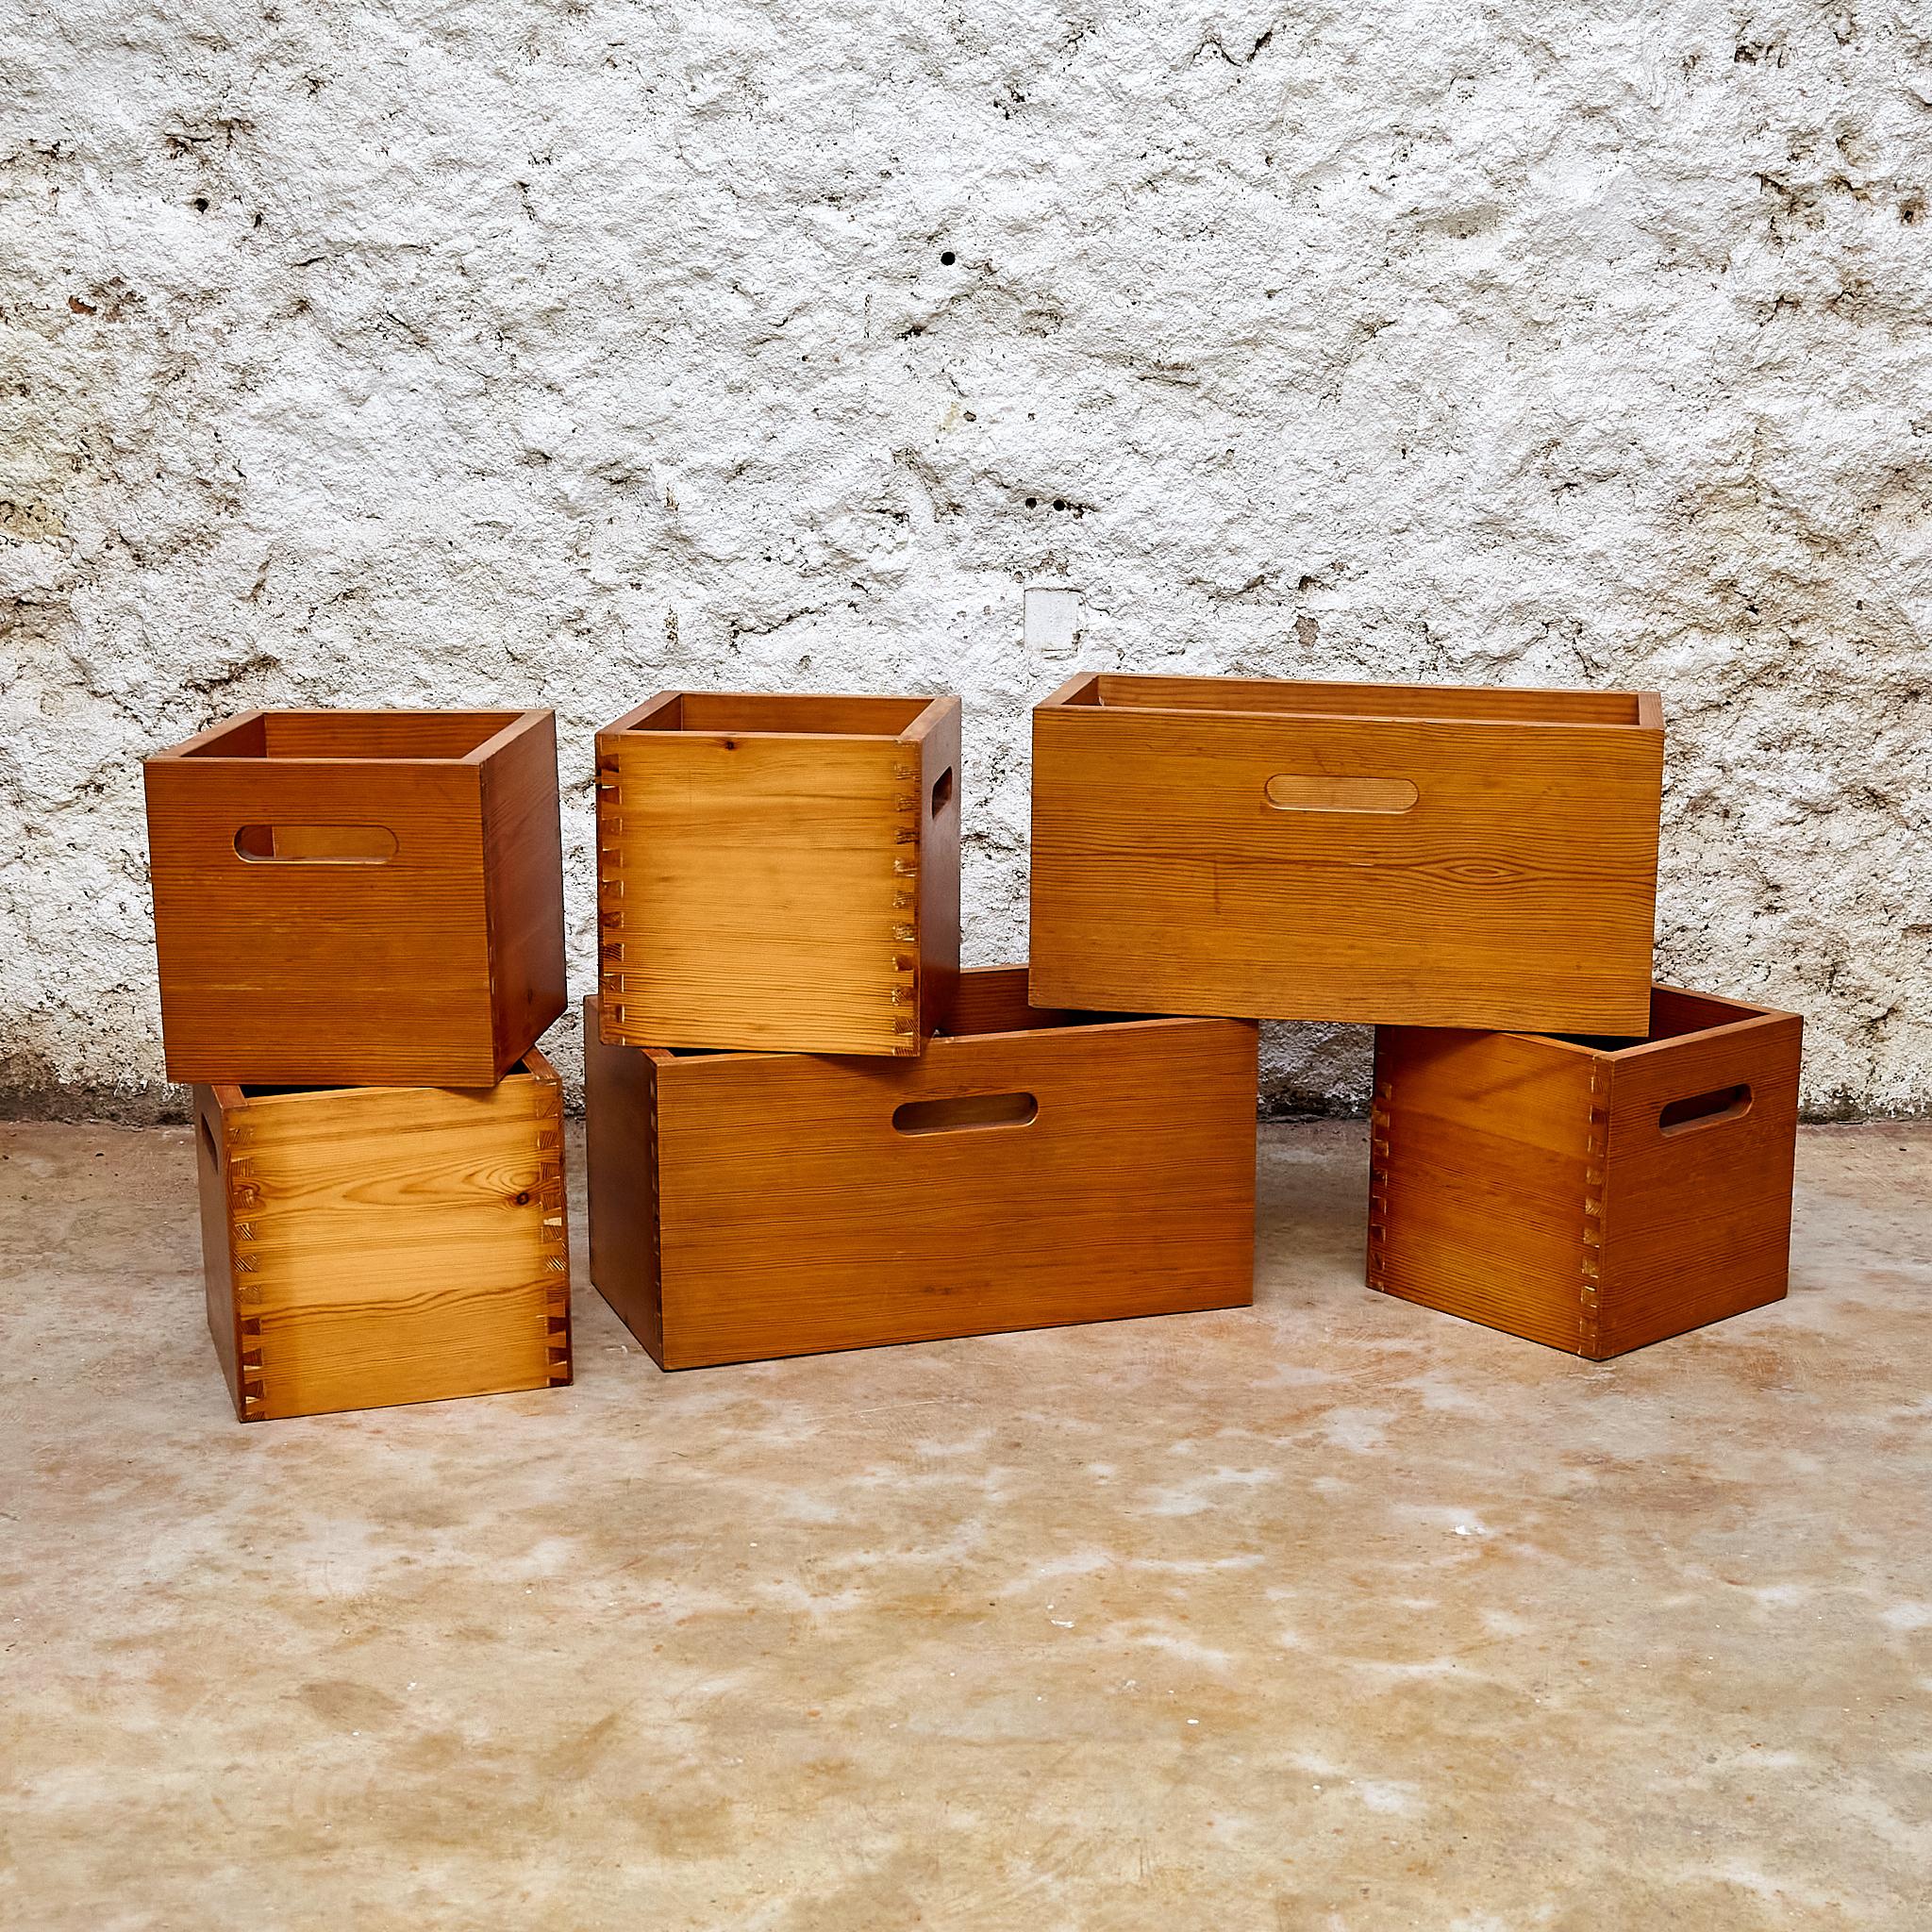 Set of 6 pine boxes by Jordi Vilanova.

In original condition with minor wear consistent of age and use, preserving a beautiful patina.

Materials: 
Wood 

Dimensions: 
L: D 25 cm x W 50 cm x H 25 cm.
S: D 25 cm x W 25 cm x H 25